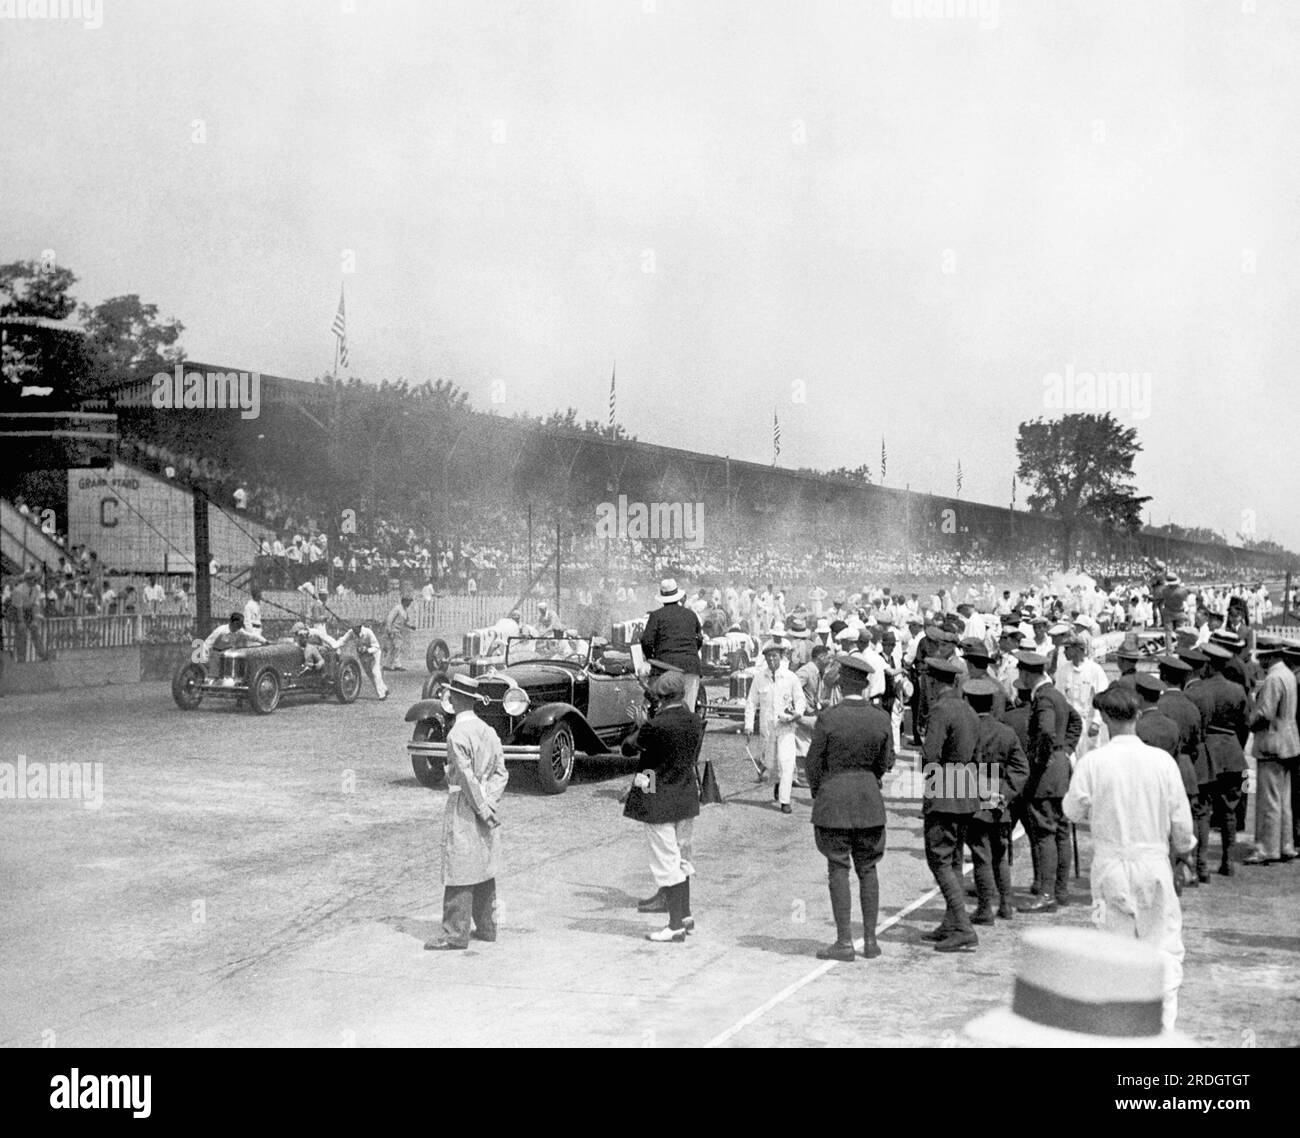 Indianapolis, Indiana:  May 31, 1929 Preparations before the start of the Indianapolis 500 auto race. Stock Photo